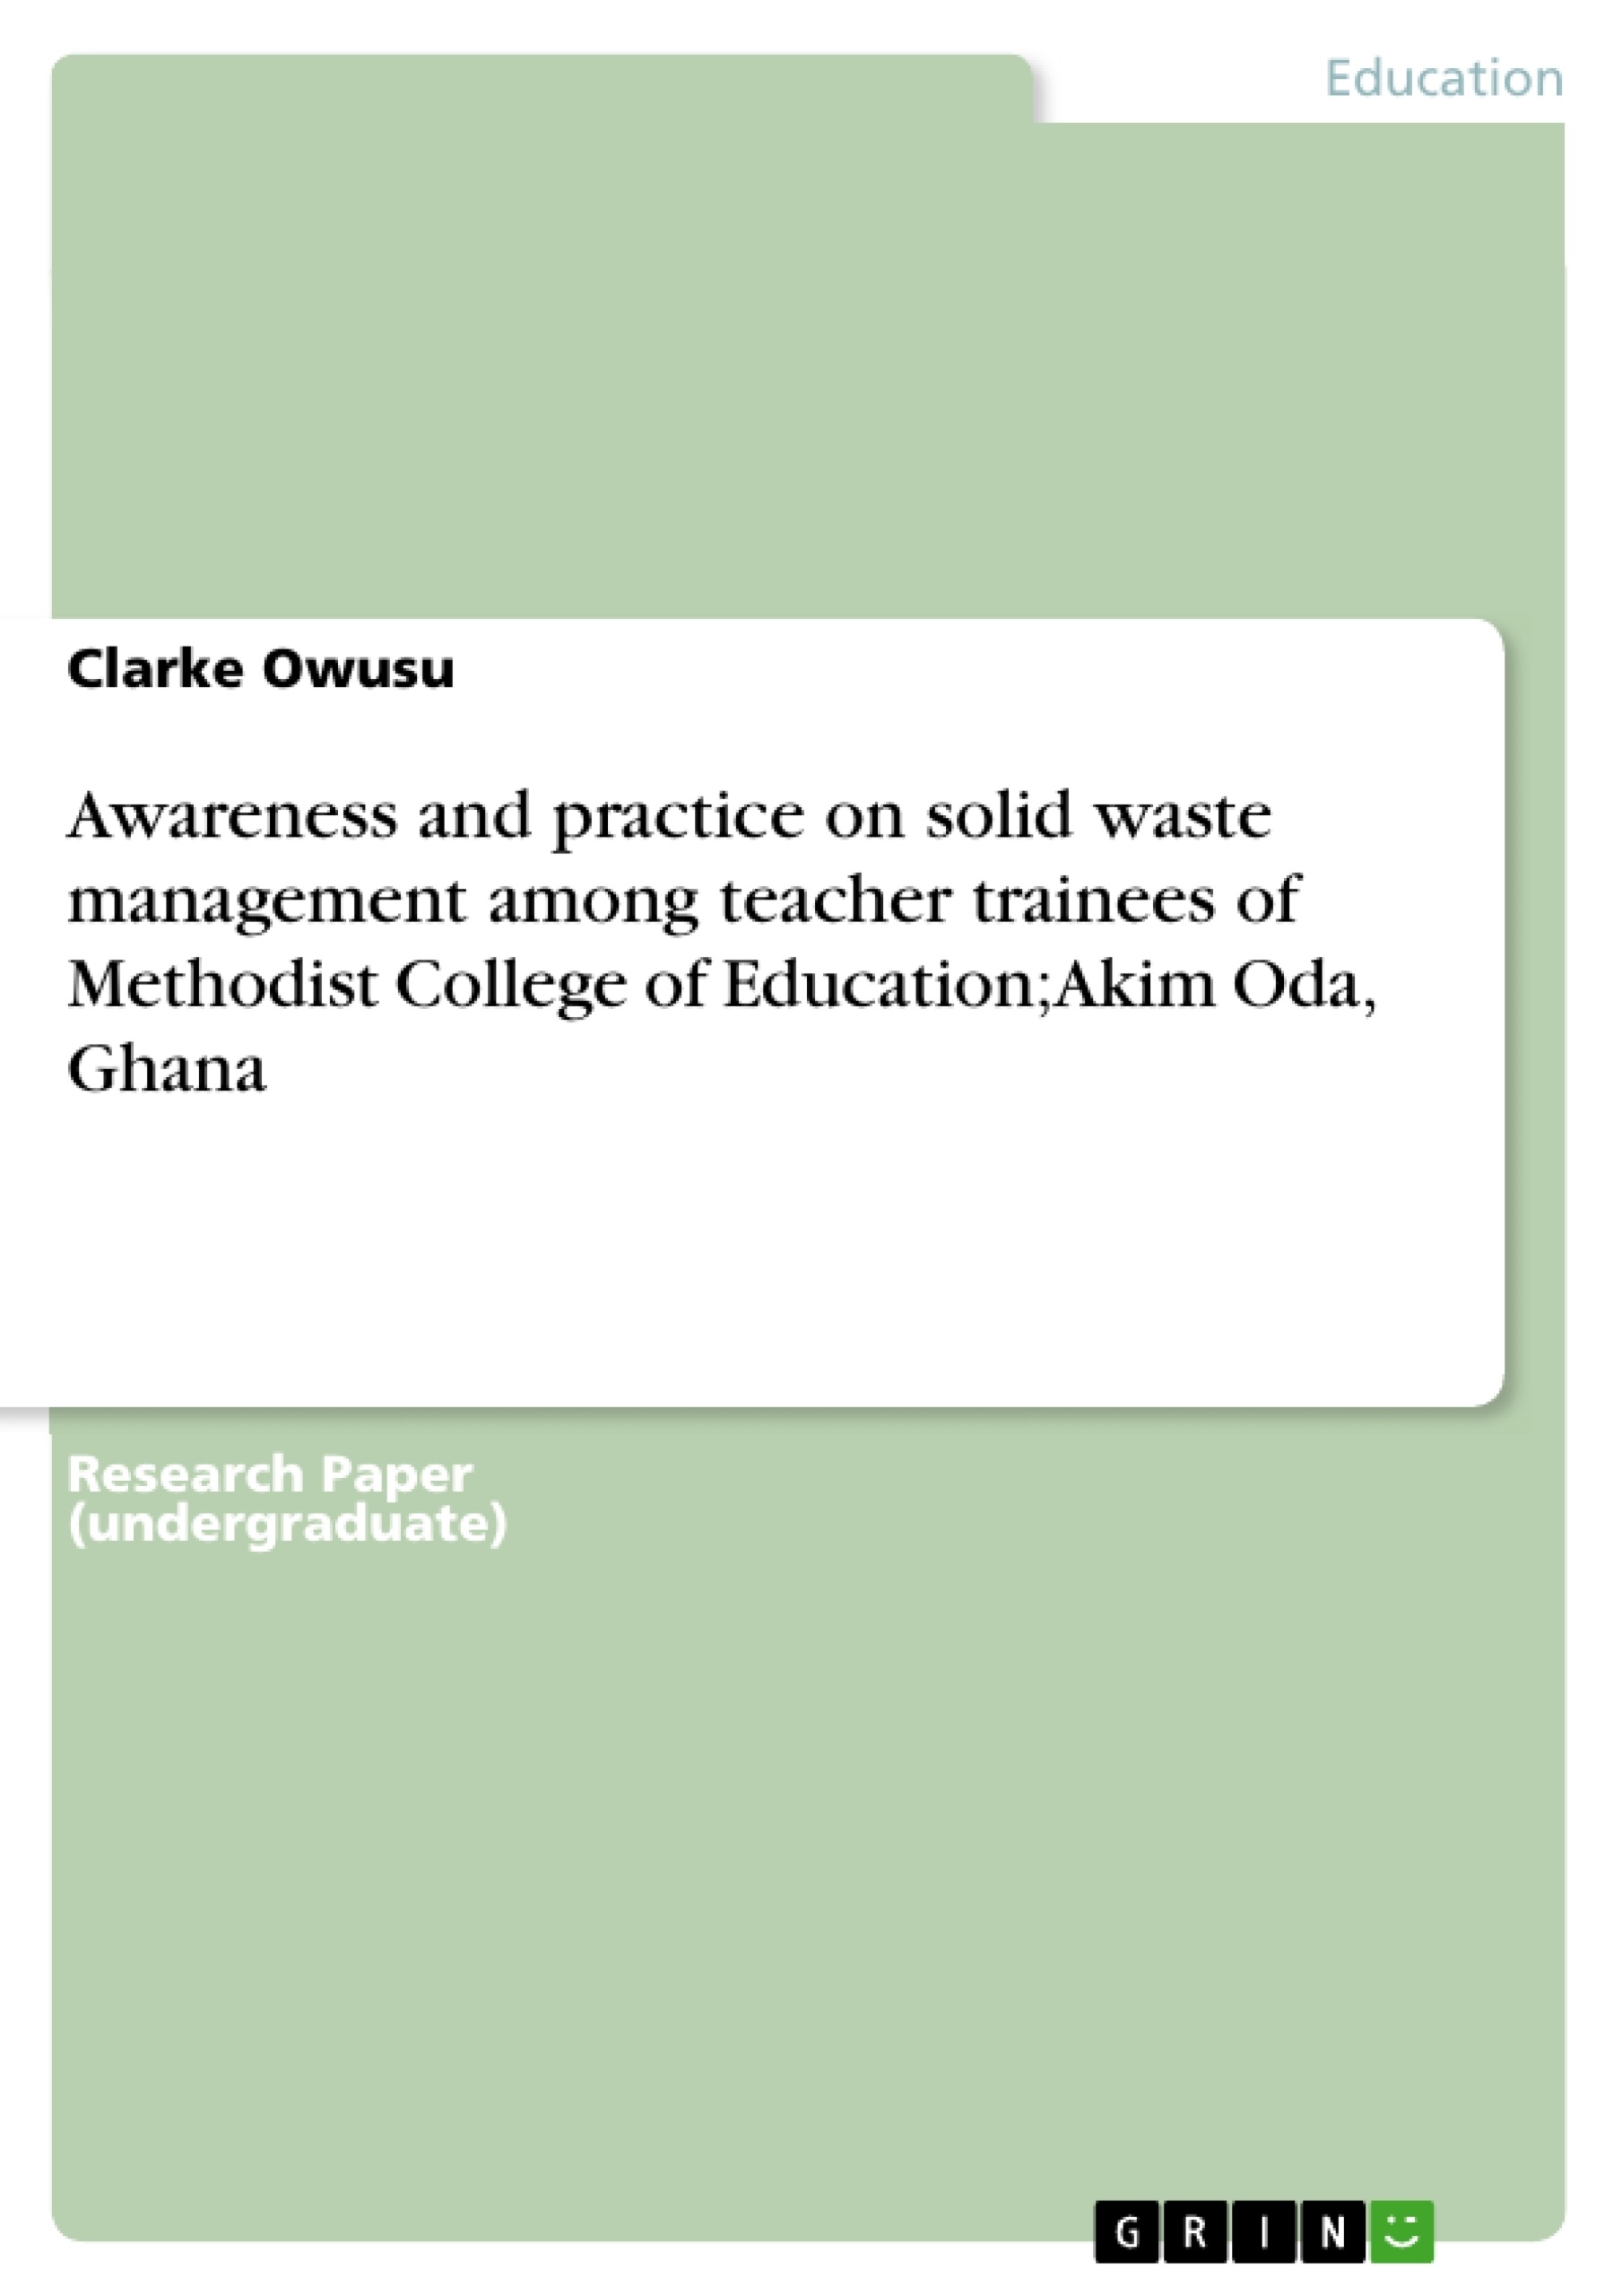 Title: Awareness and practice on solid waste management among teacher trainees of Methodist College of Education; Akim Oda, Ghana